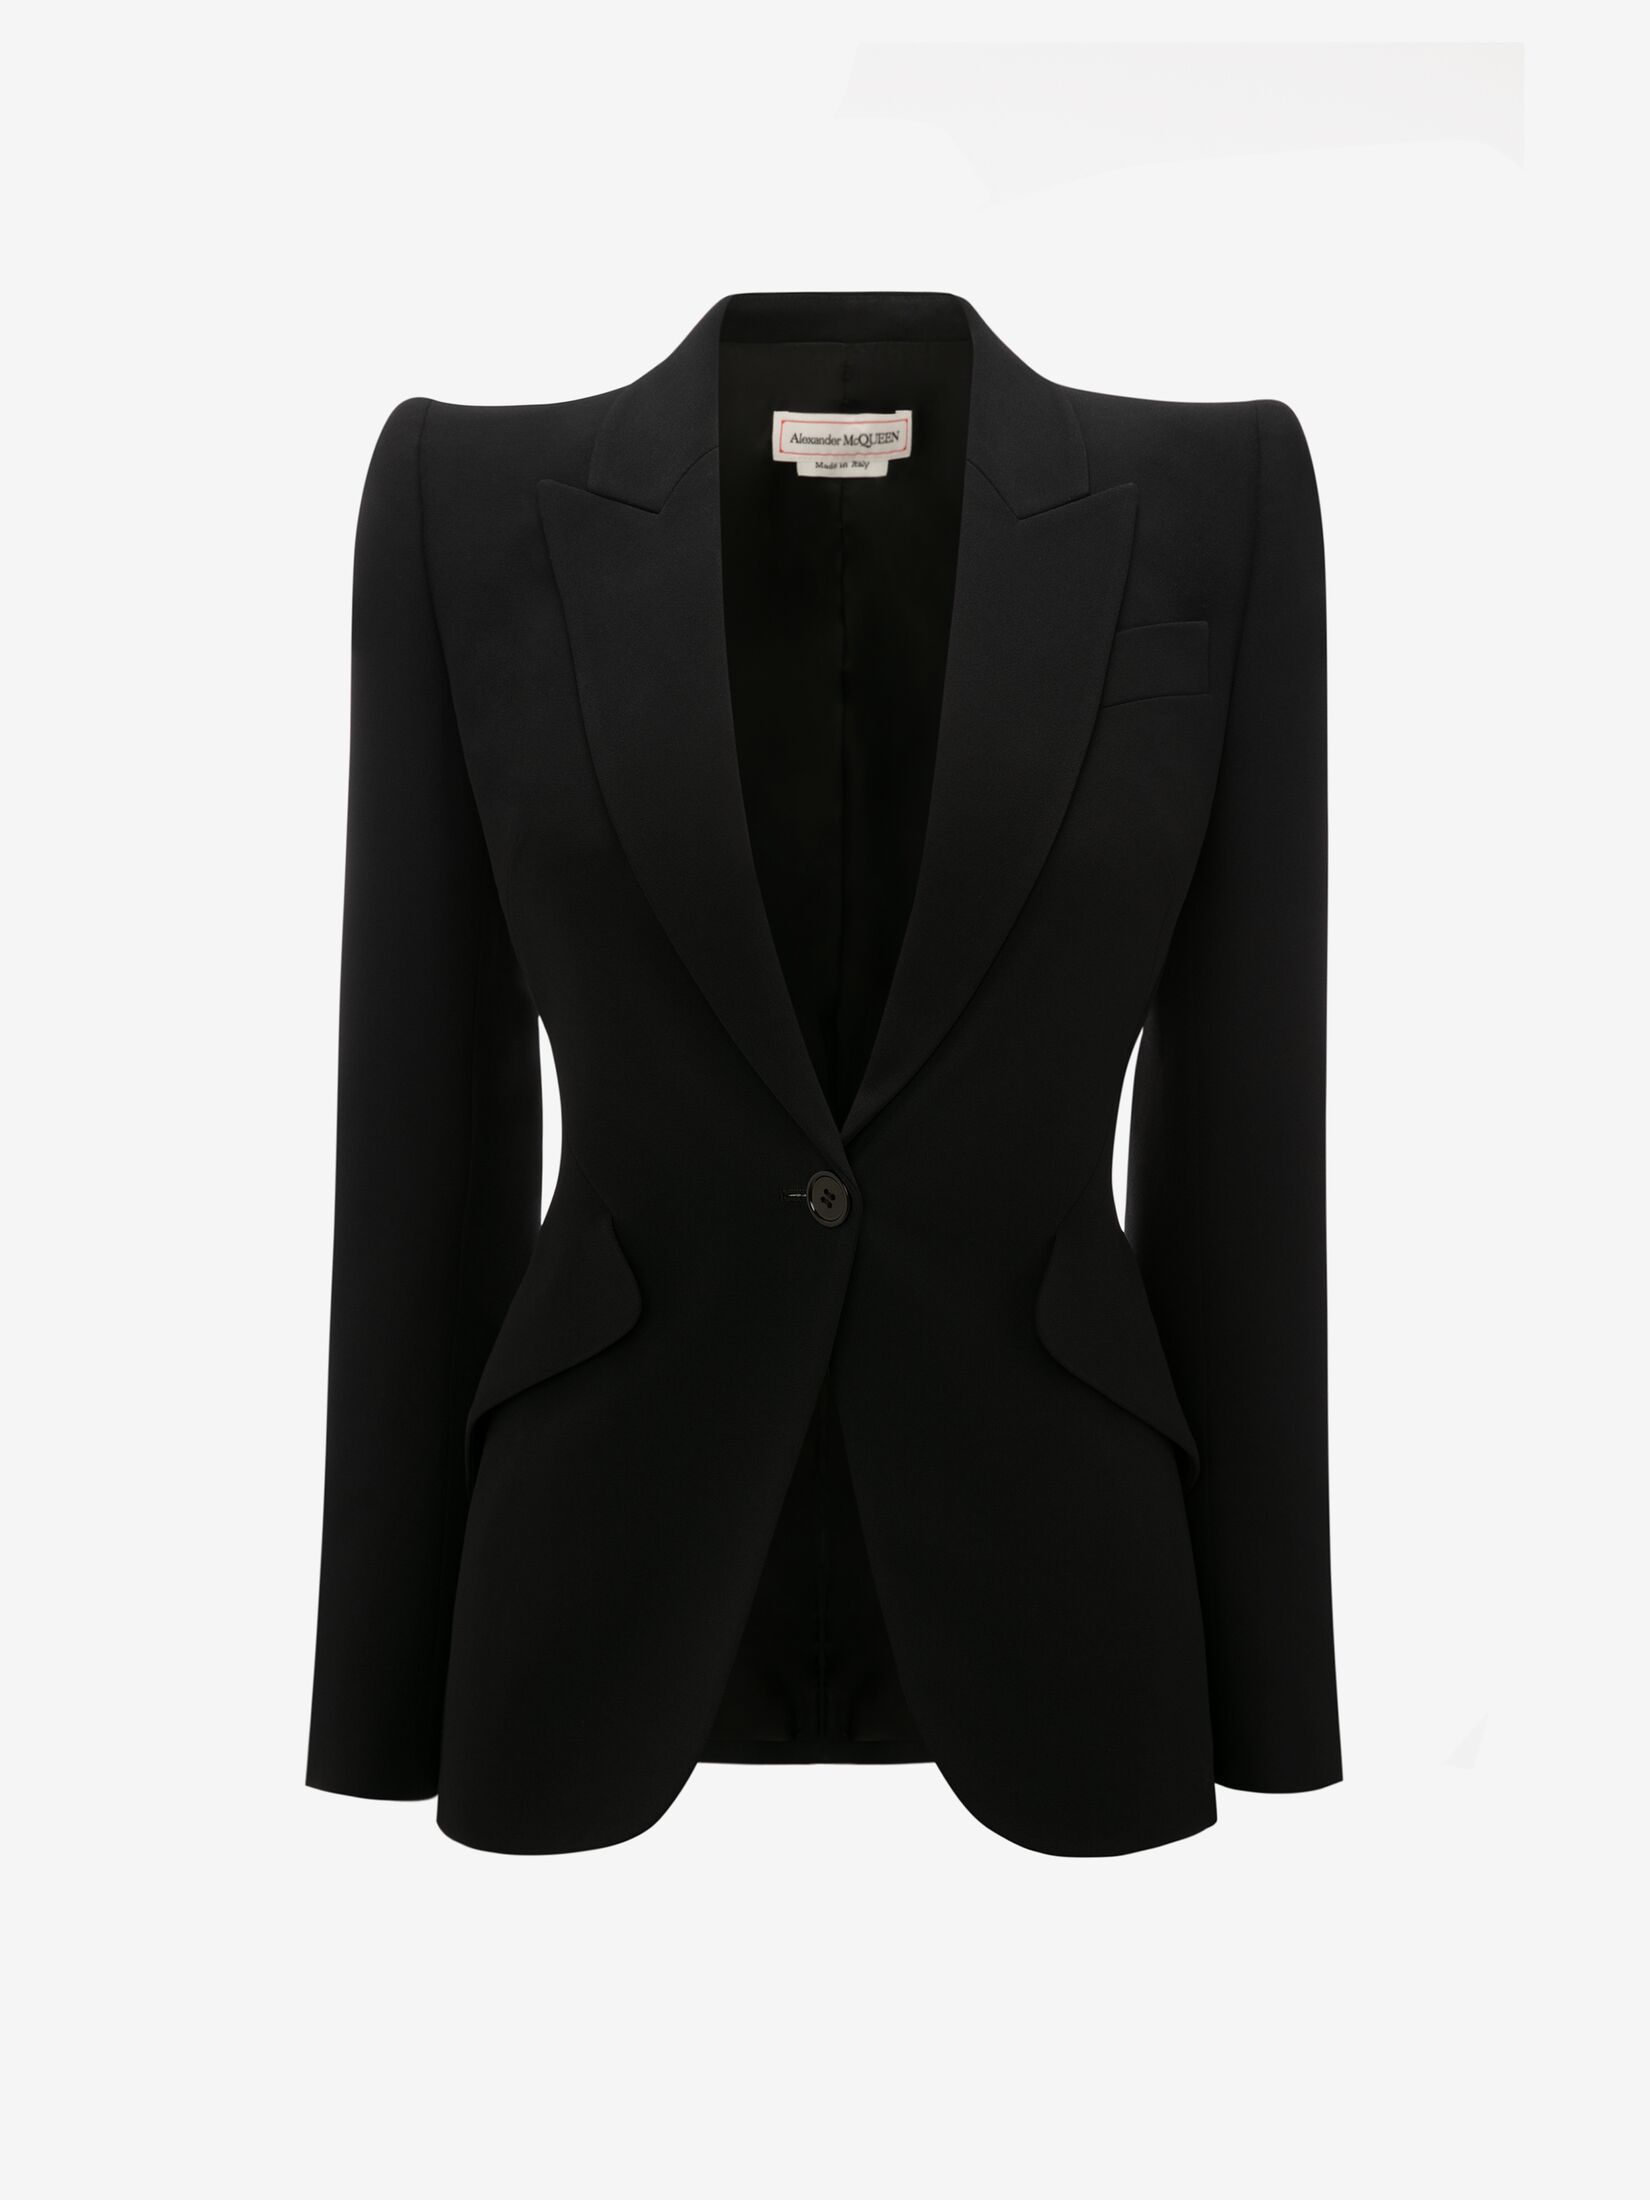 Women's black crepe jacket with a peak on the shoulders